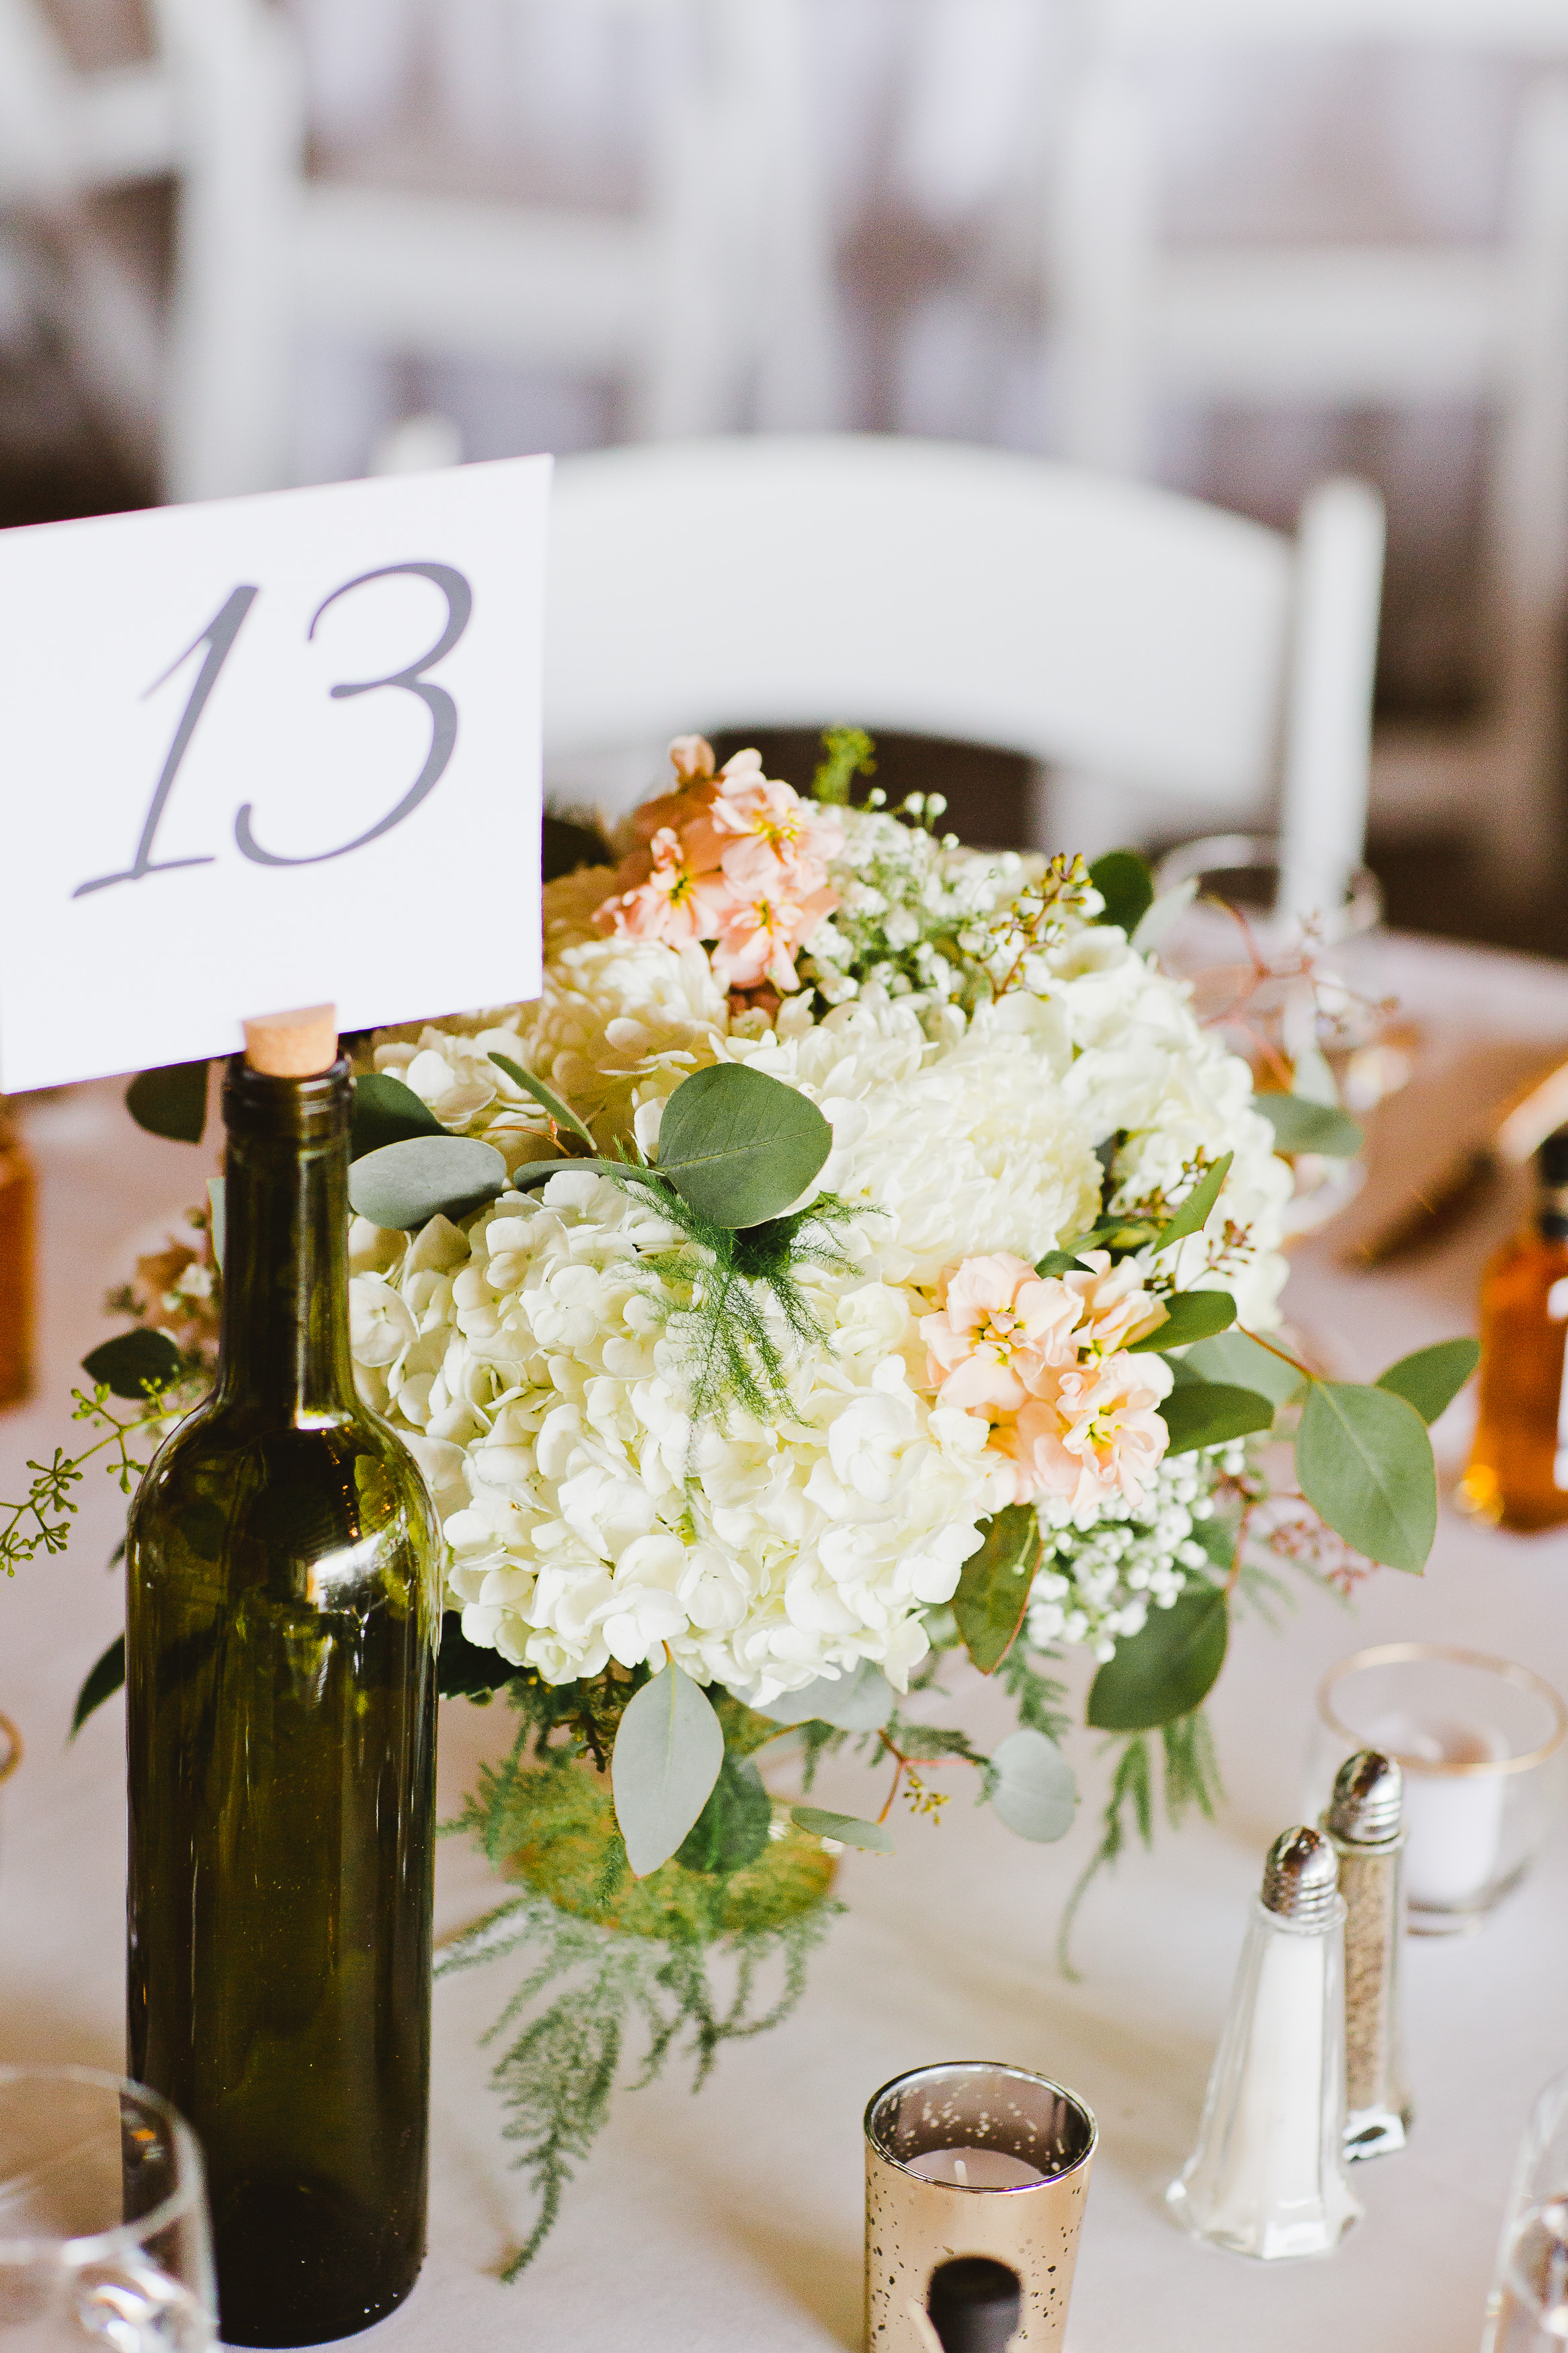 Wine Bottle Table Number | Blush and Ivory Centerpiece | Rustic Wedding Centerpiece | Asgari Photography | Swans Trail Farm Snohomish Wedding | Snohomish Wedding Planner | Seattle Wedding Planner